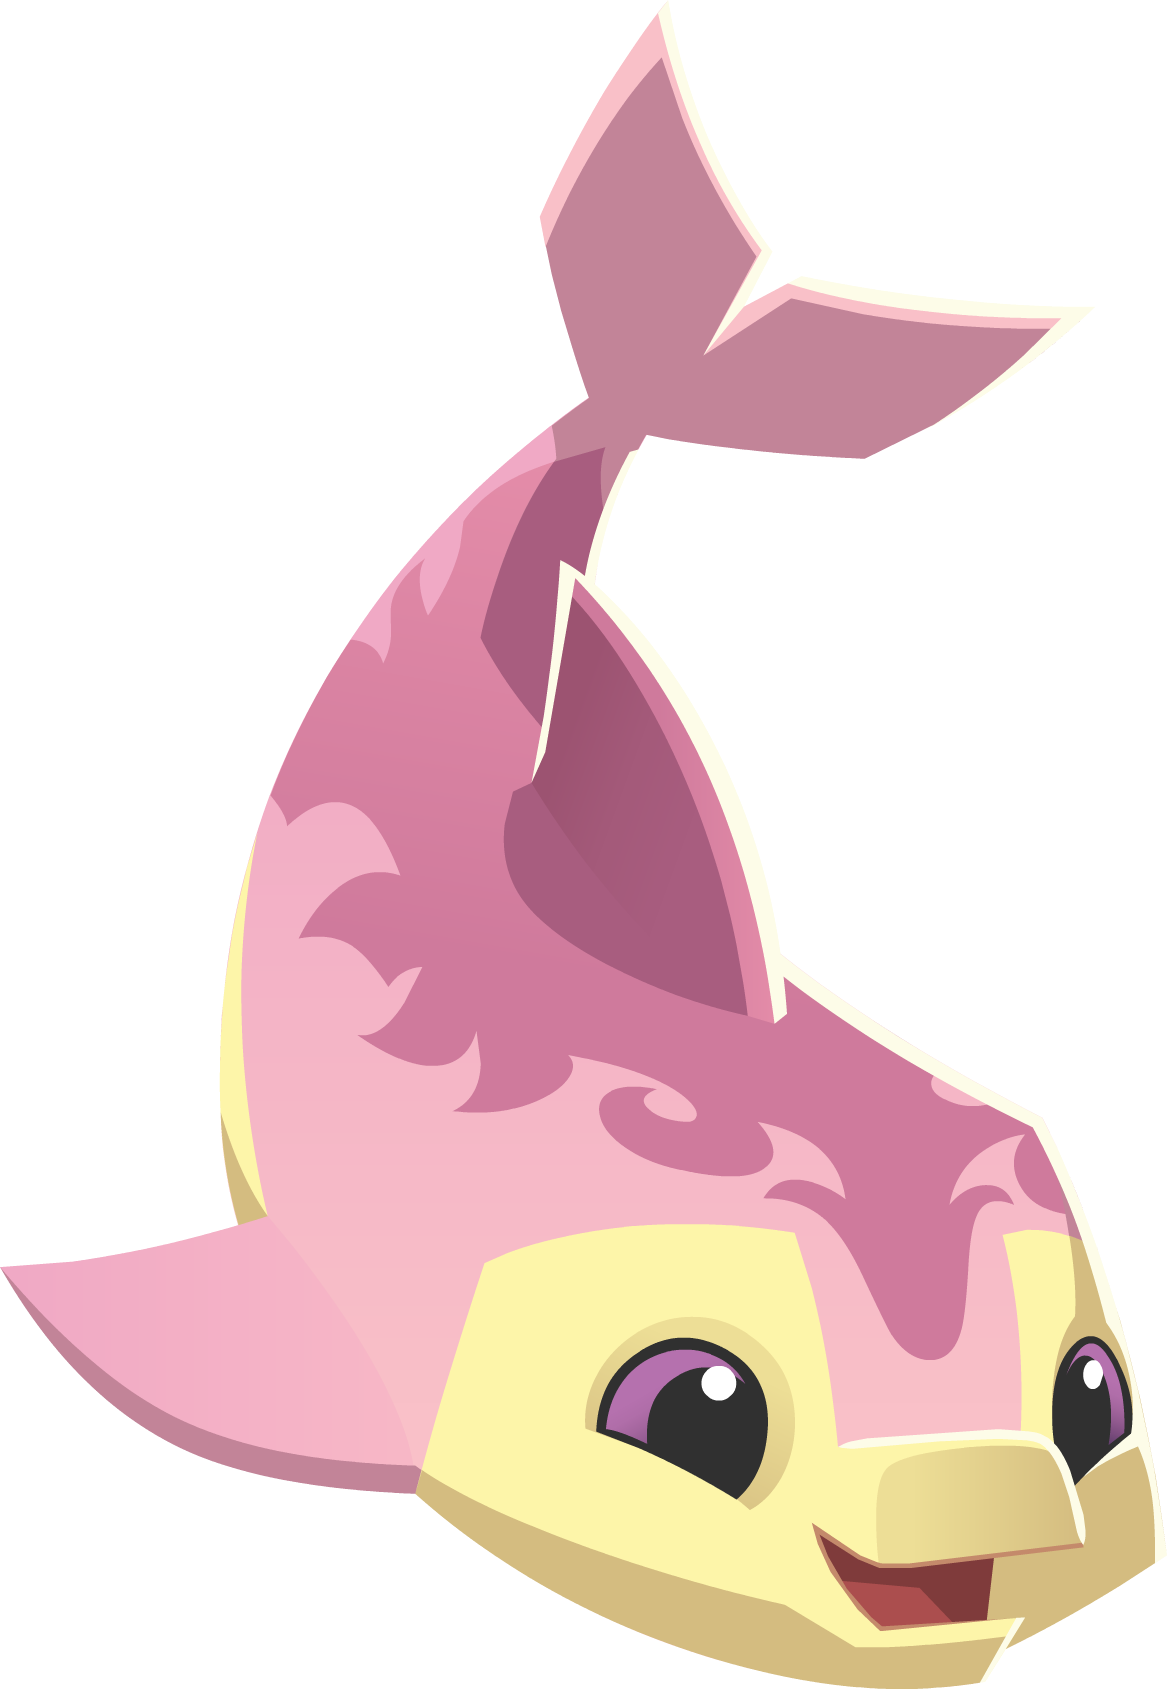 Download Image - Pink and yellow dolphin graphic.png | Animal Jam Wiki | FANDOM powered by Wikia